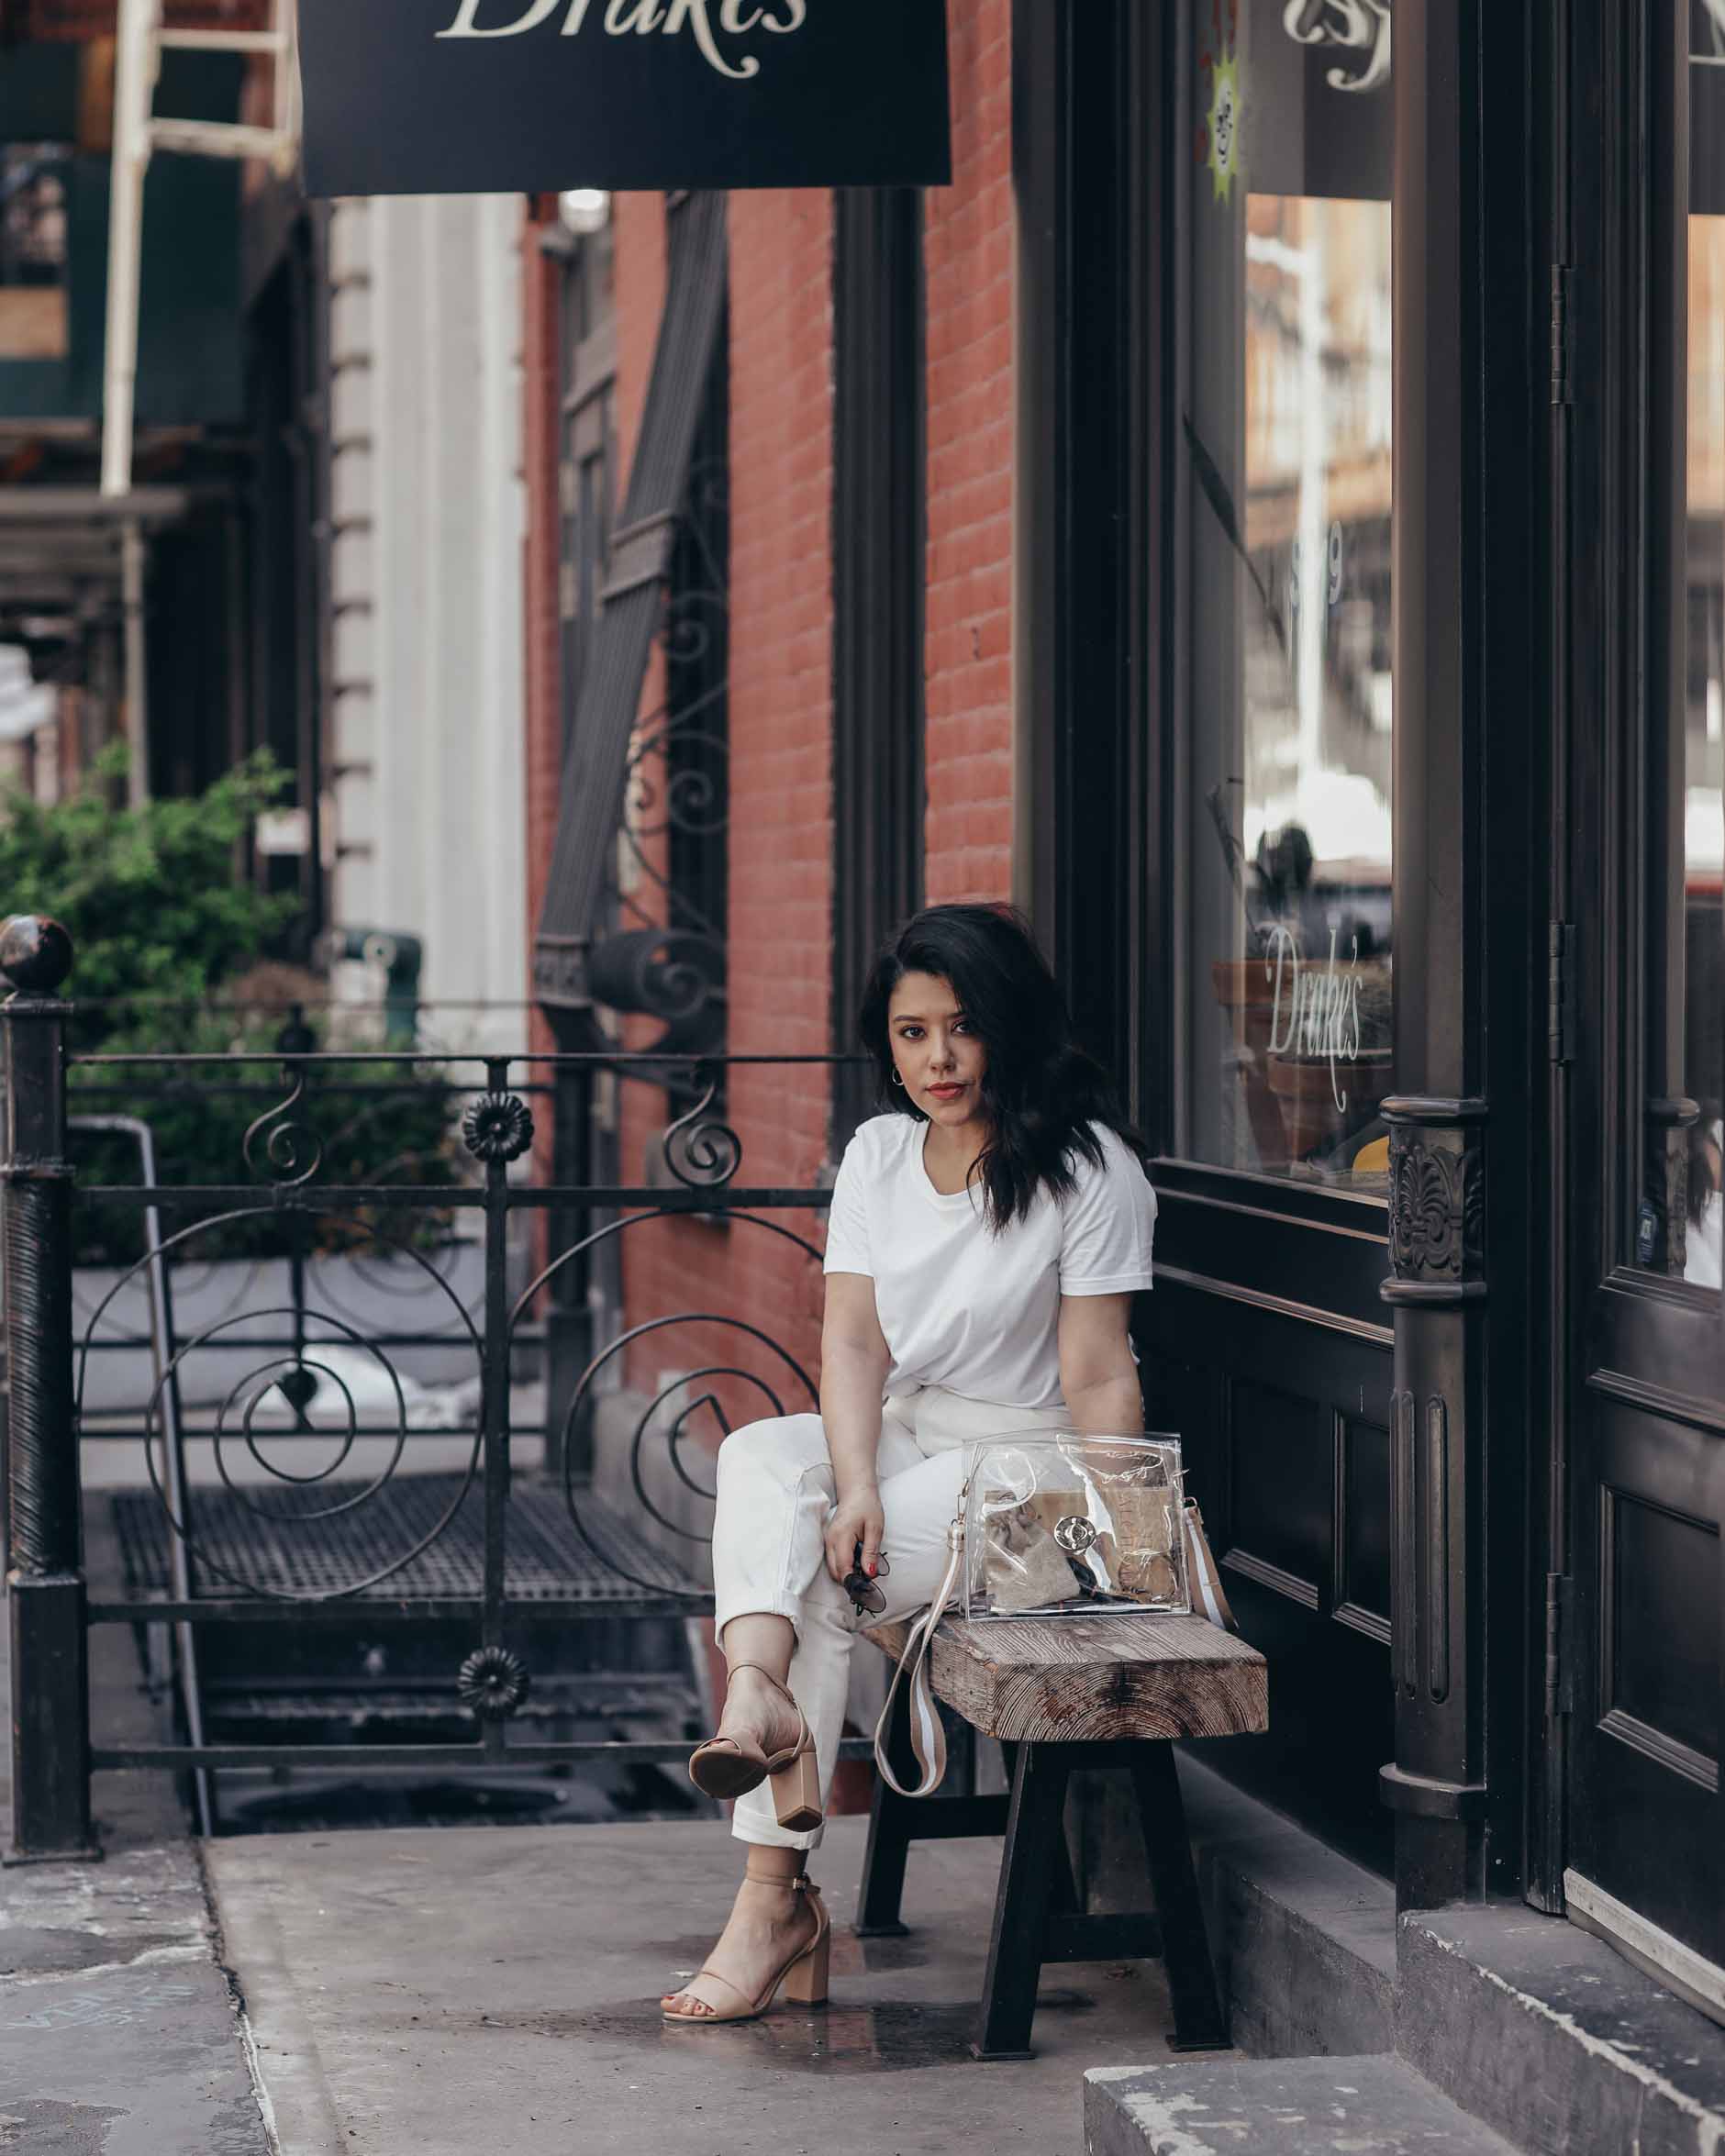 naty michele in soho ny wearing all white for we dress america